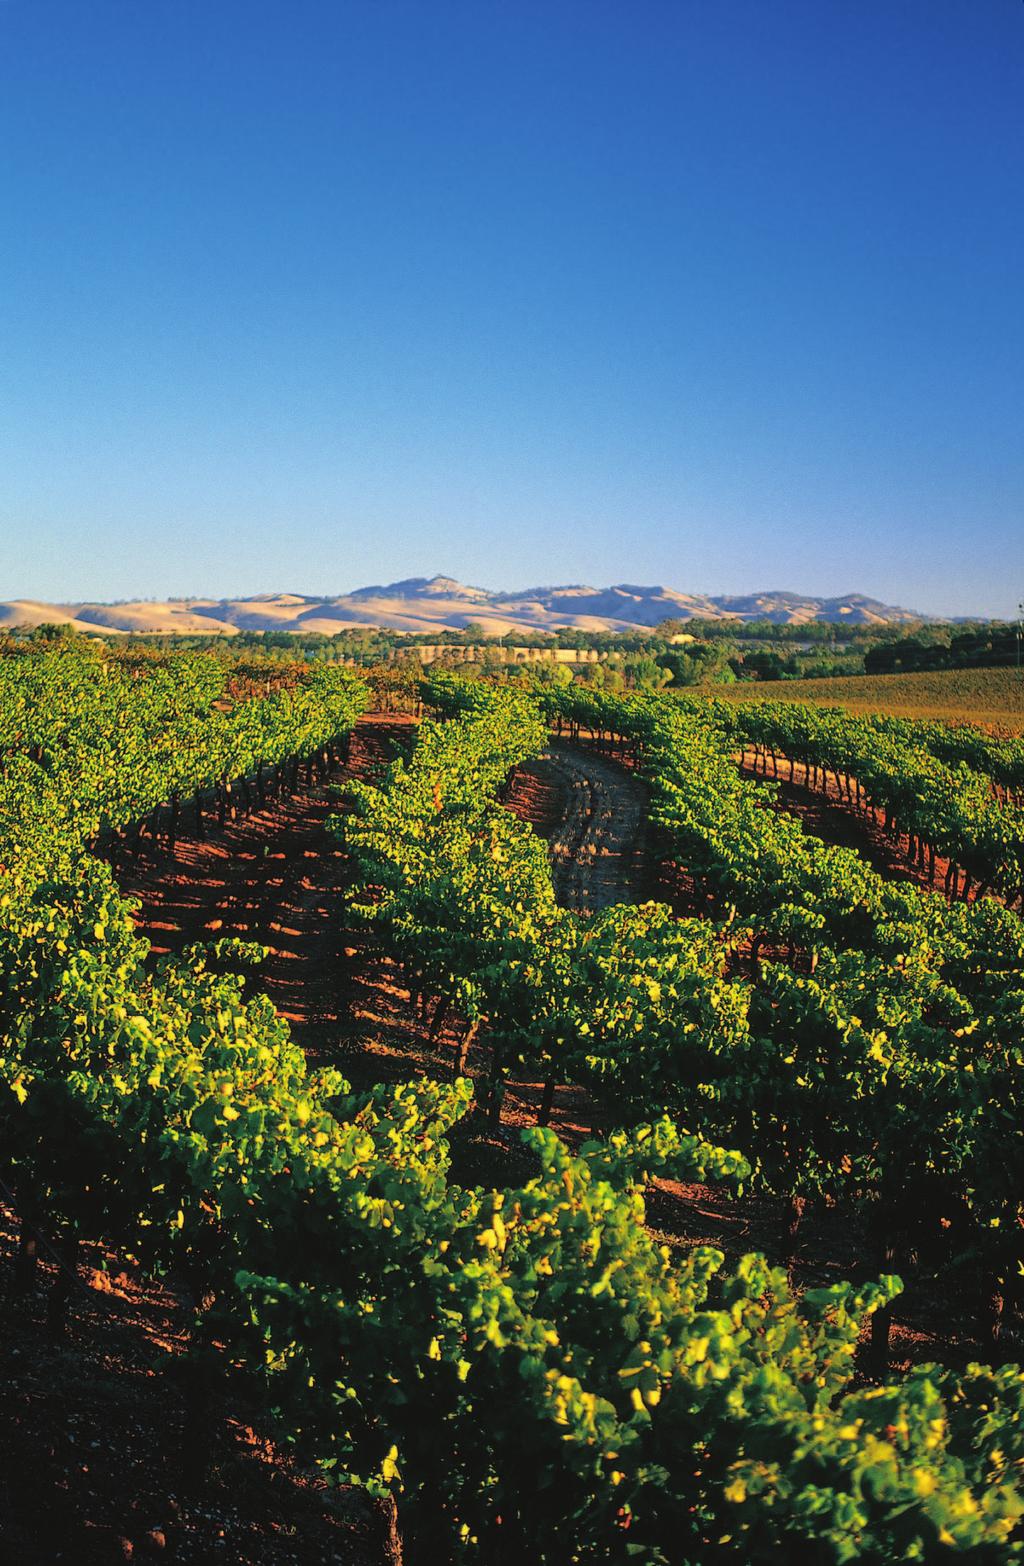 THE LOUISE Barossa Valley, South Australia Food & Wine Collection - THE LOUISE 5-day/3-night from HKD10,990 between Hong Kong and Adelaide on 1 night accommodation at InterContinental Adelaide (Club